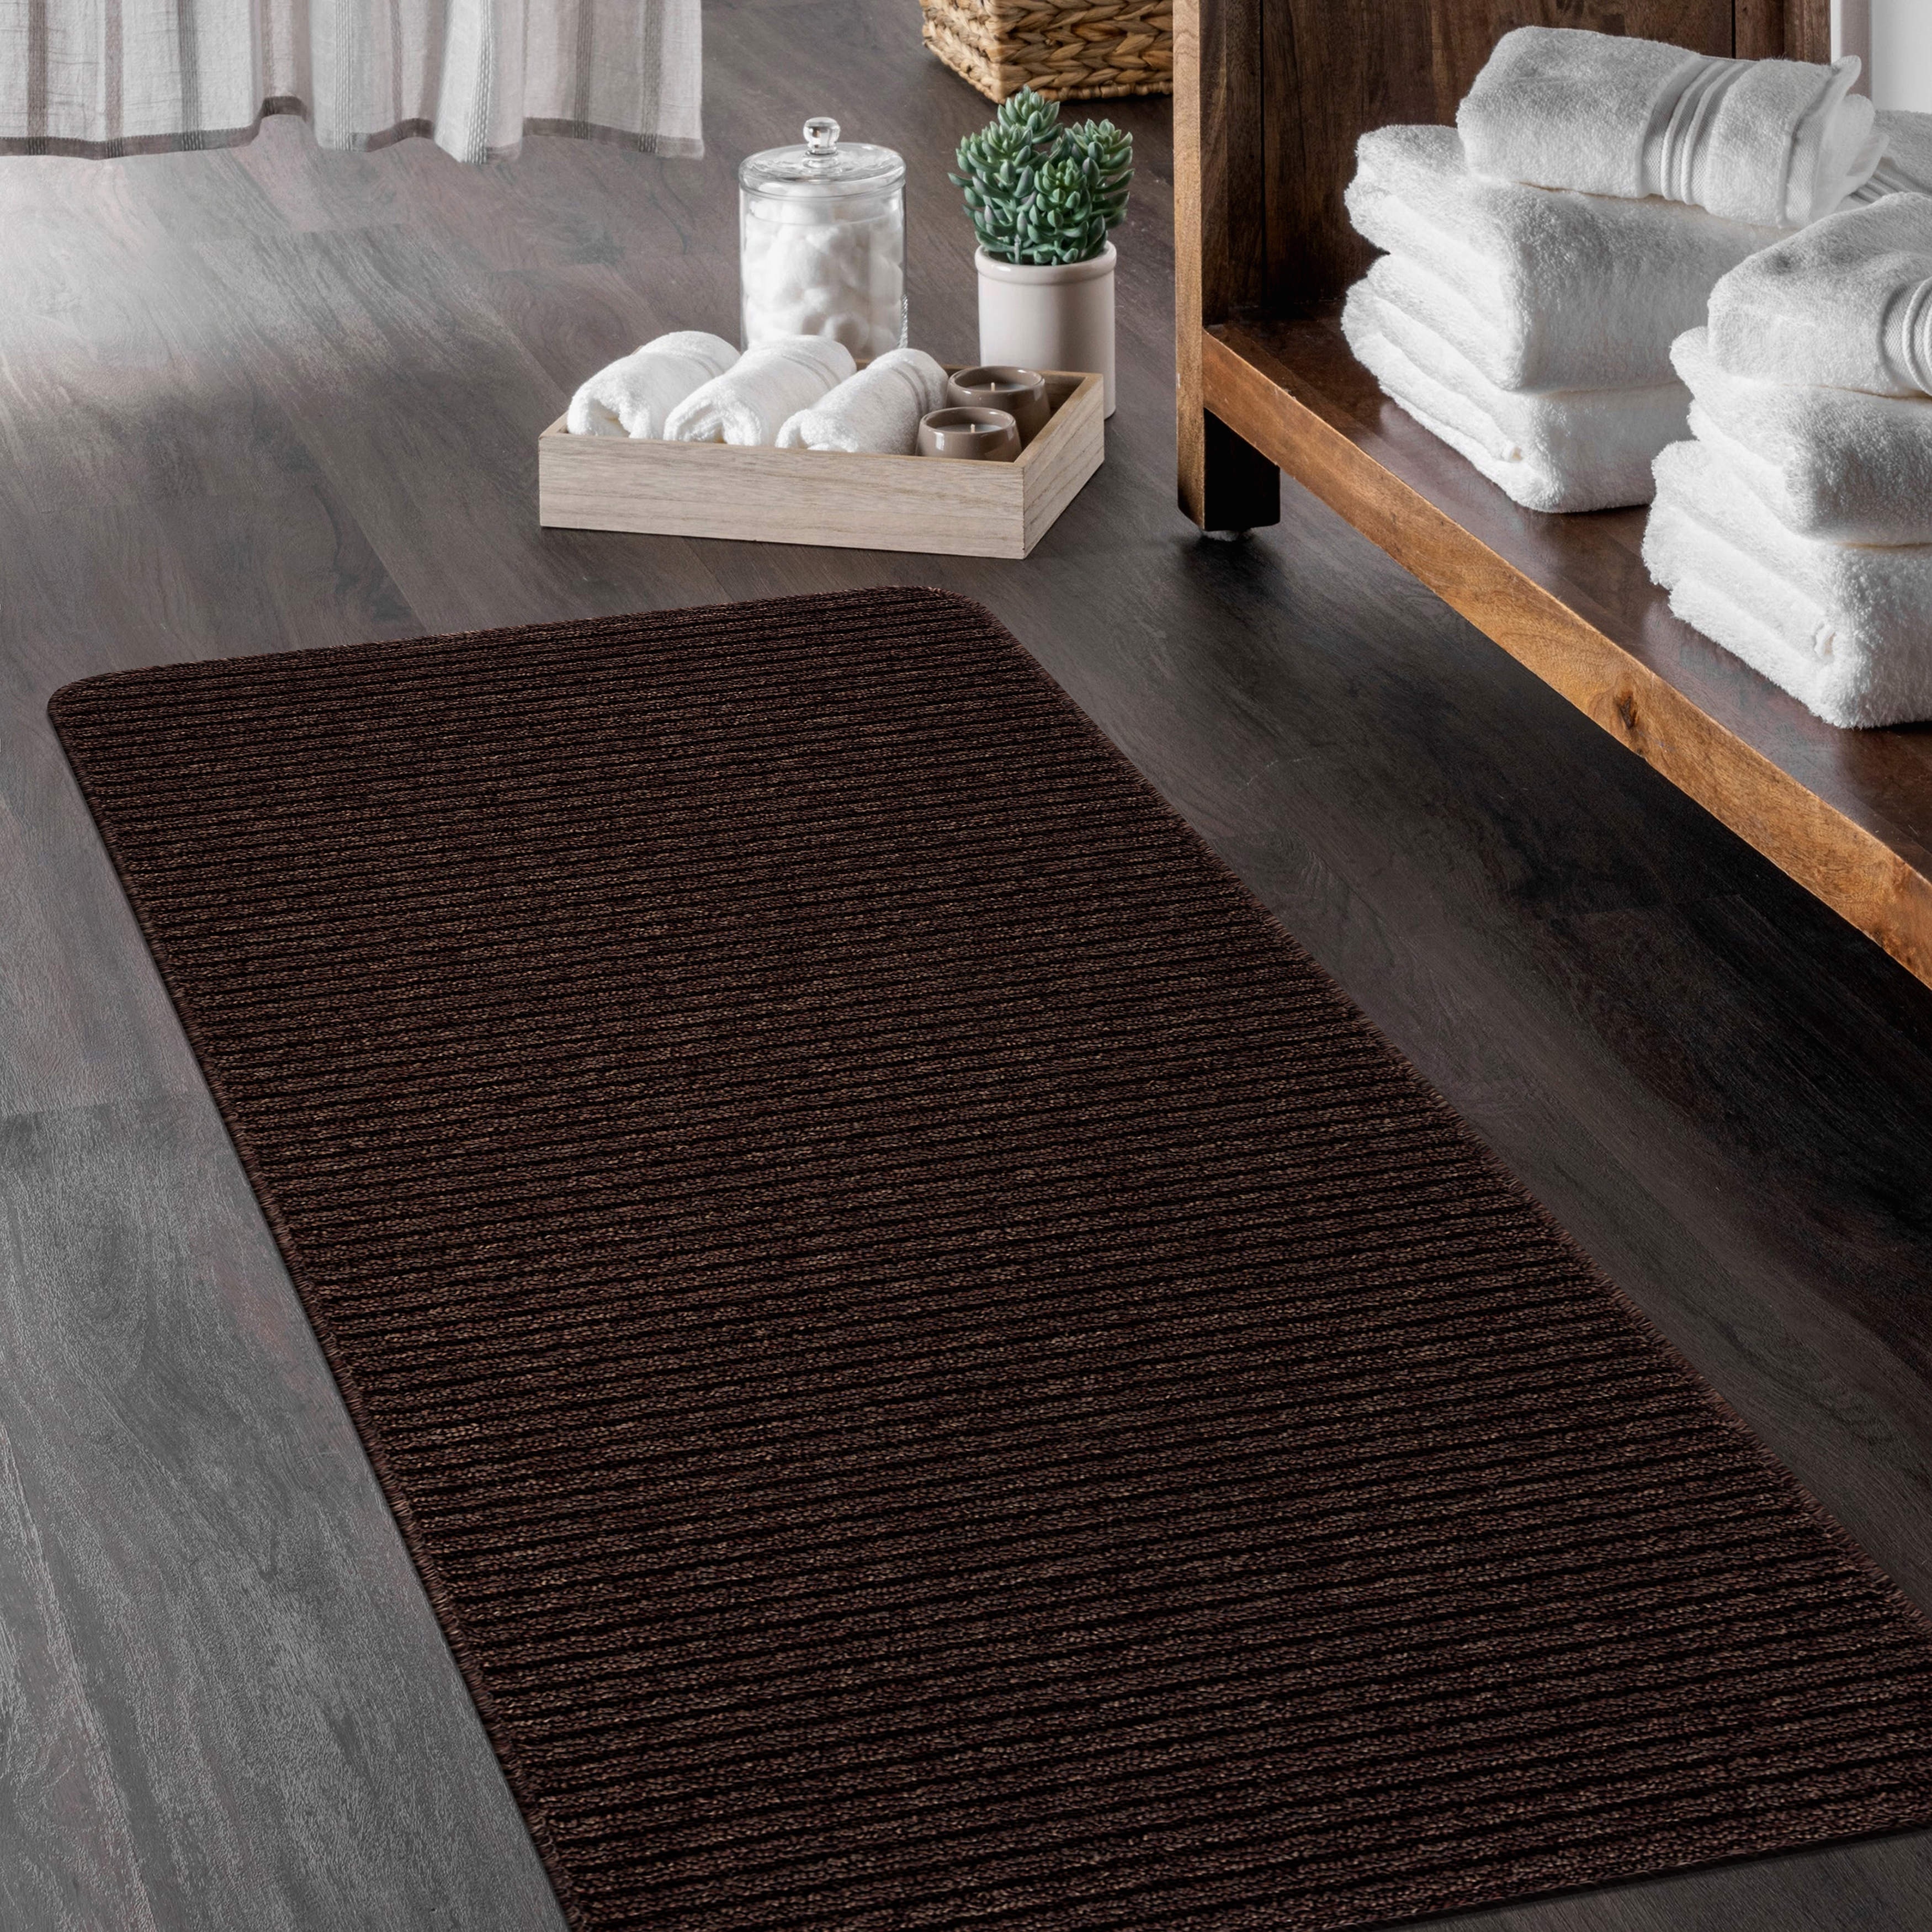 https://ak1.ostkcdn.com/images/products/is/images/direct/5e7cdd28aca2d964400218926fe1b511734ea719/Beverly-Rug-Non-Skid-Washable-Kitchen-Rugs-and-Kitchen-Mats%2C-Set-of-2%2C-20%22x48%22-%26-20%22x30%22.jpg